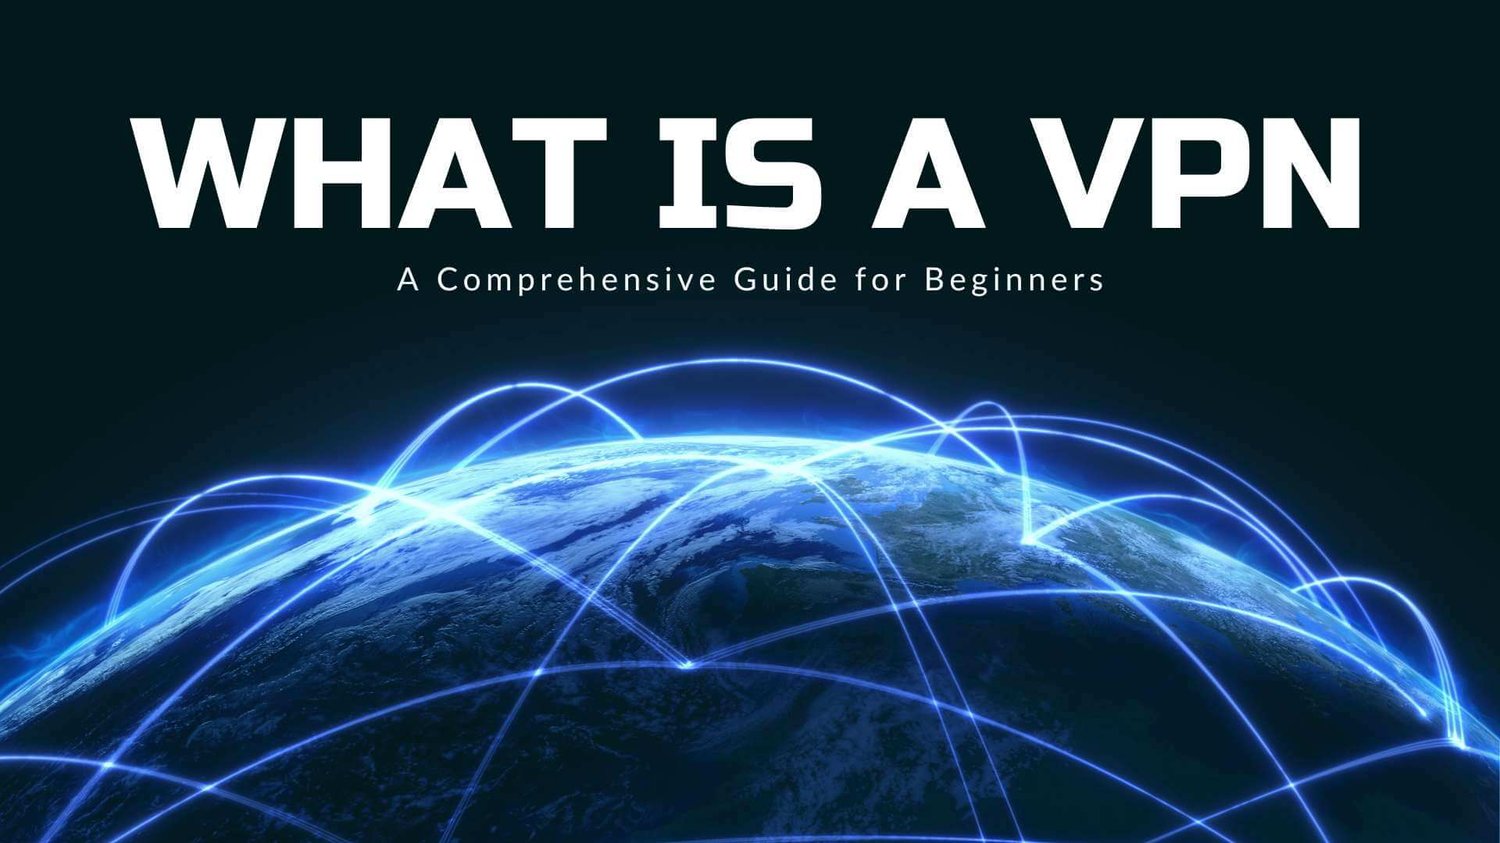 What Is a VPN? A Comprehensive Guide for Beginners